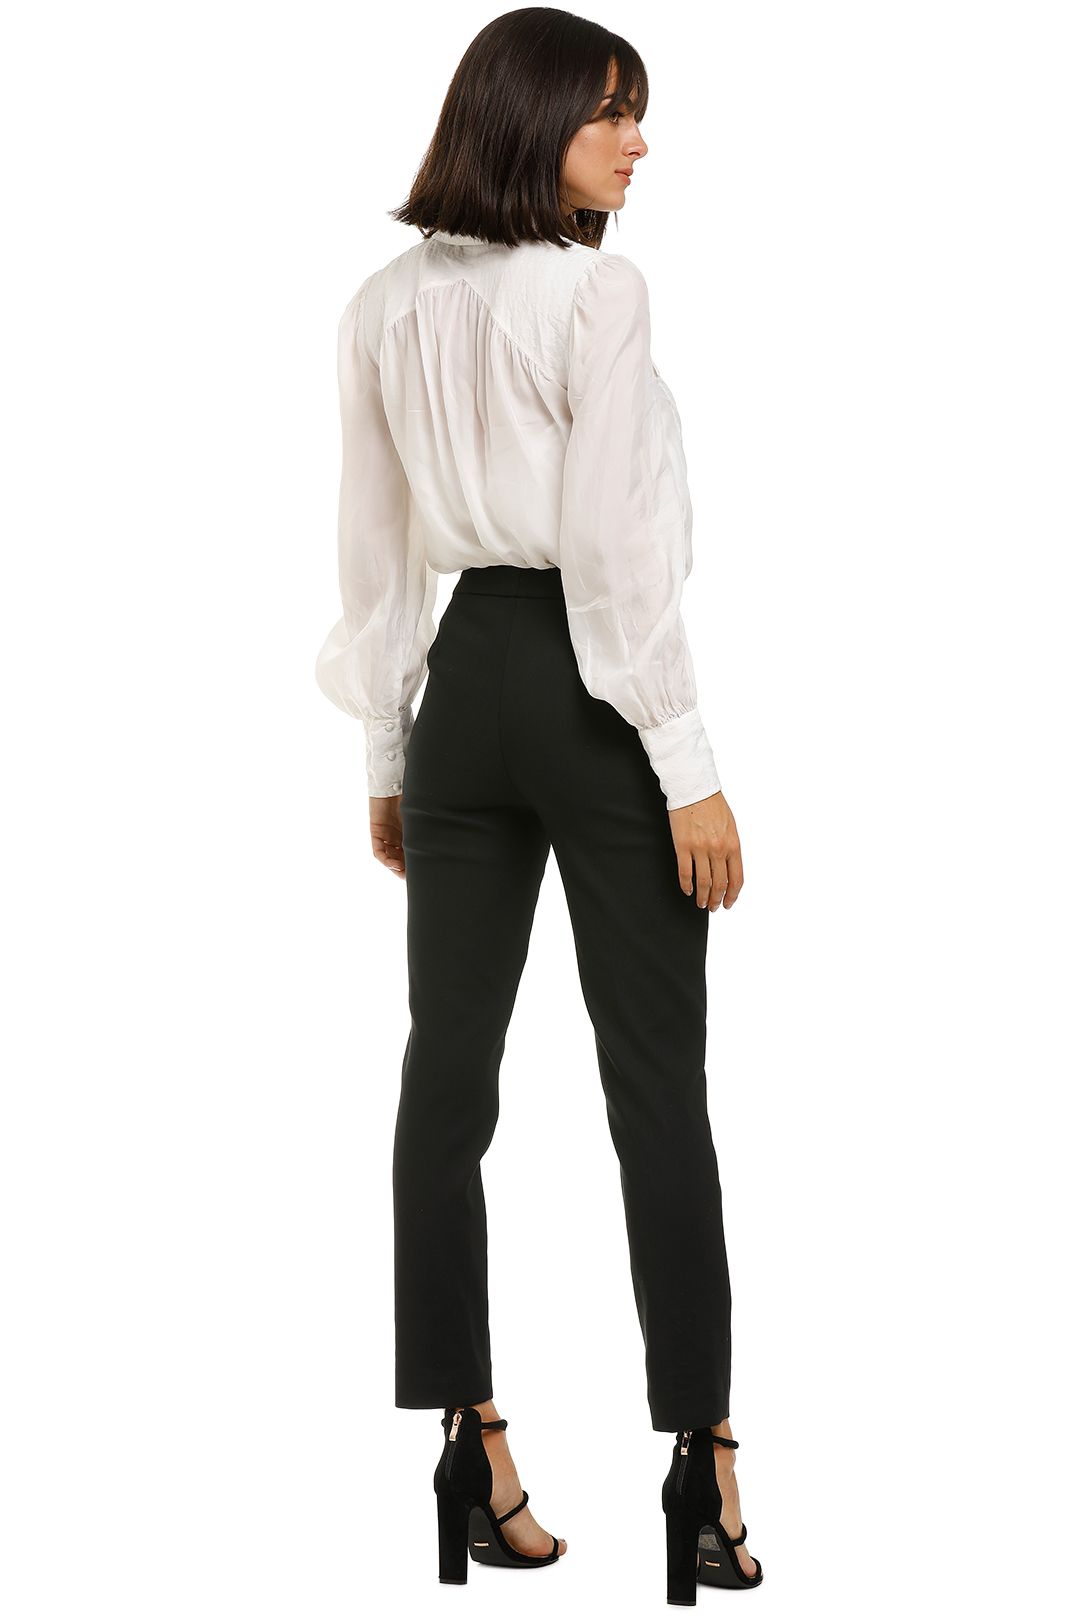 Country-Road-High-Waist-Pant-Black-Back